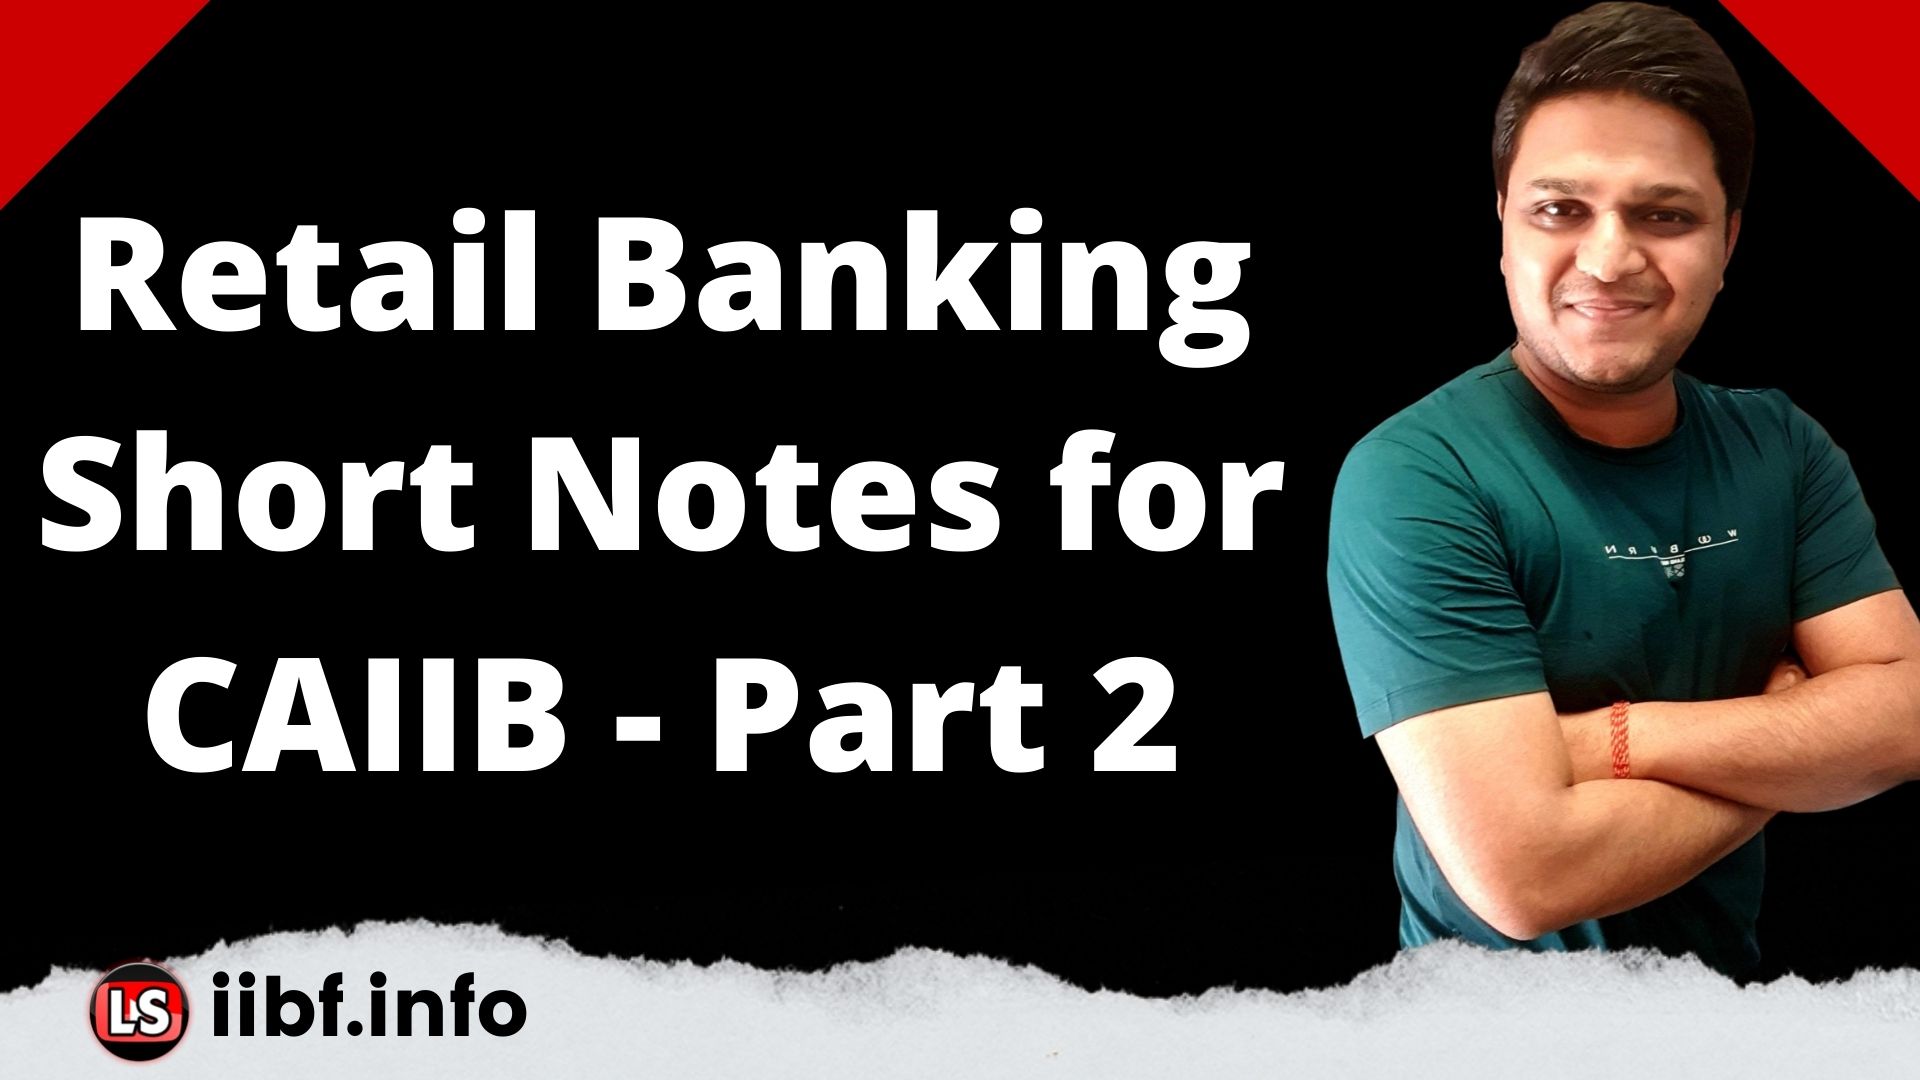 Retail Banking Short Notes for CAIIB - Part 2